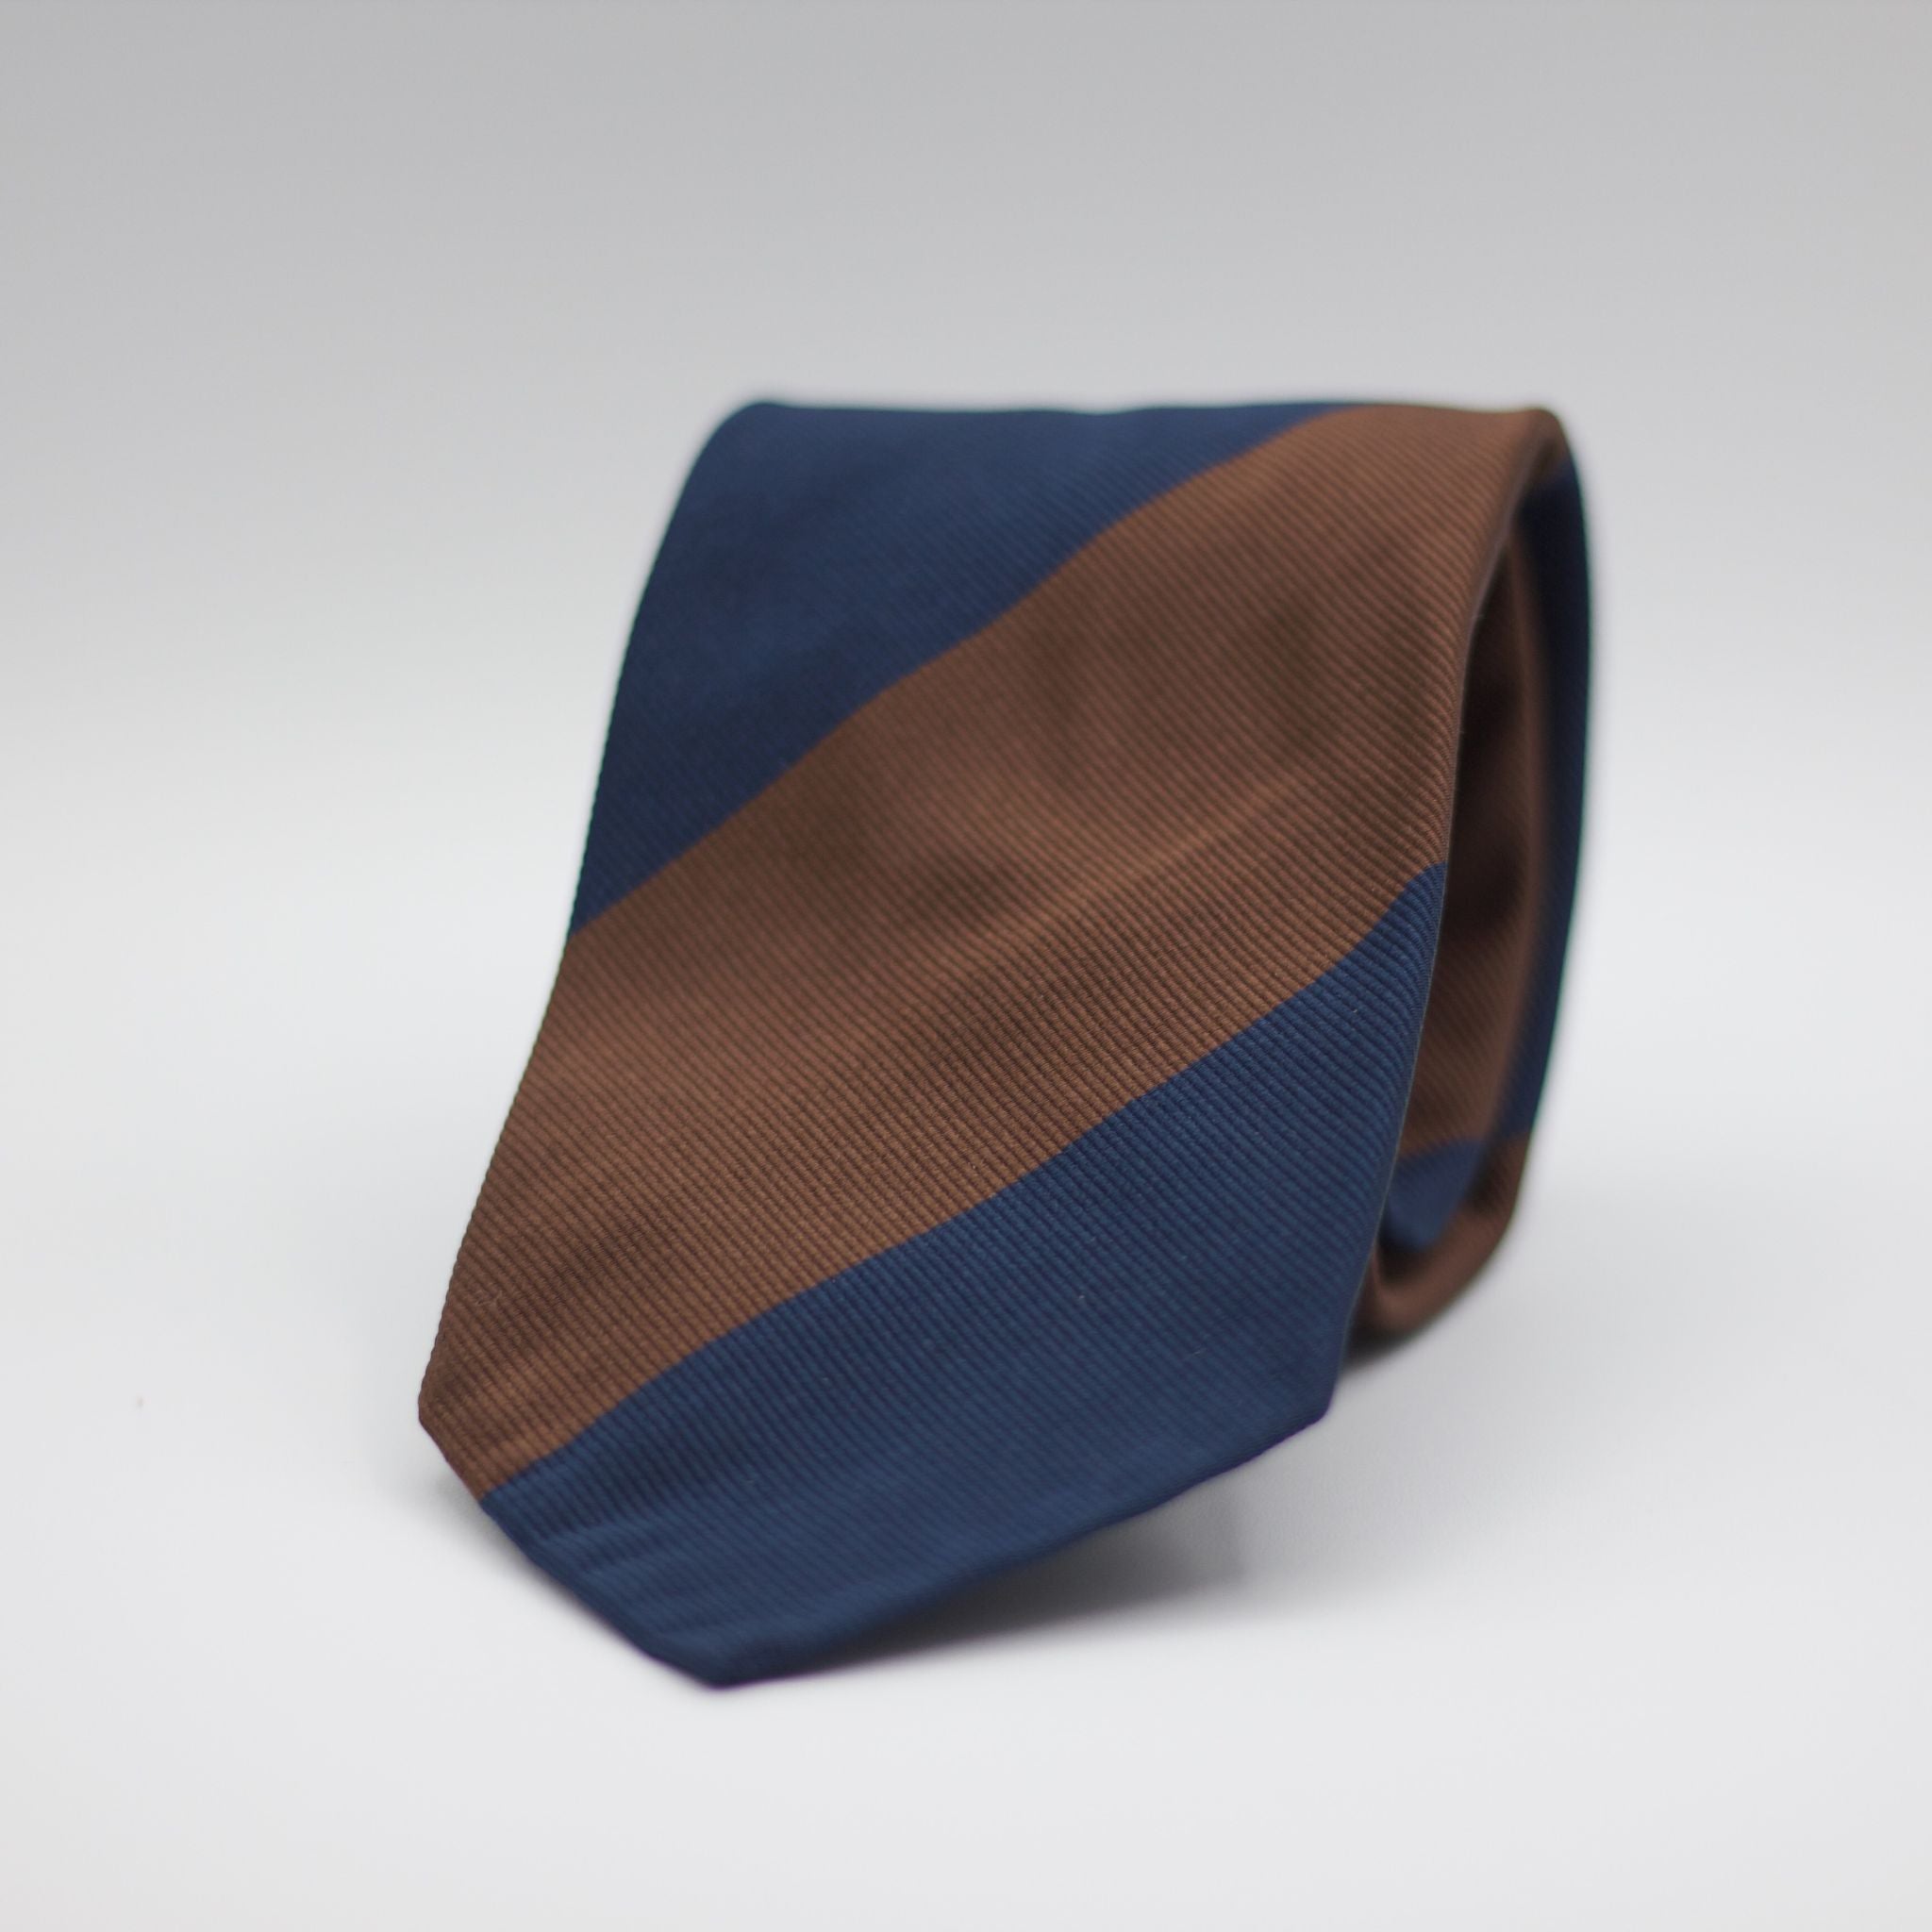 Cruciani & Bella 100% Woven Jacquard Silk Unlined Blue and Brown block stripes Unlined Tie Handmade in Italy 8 x 150 cm